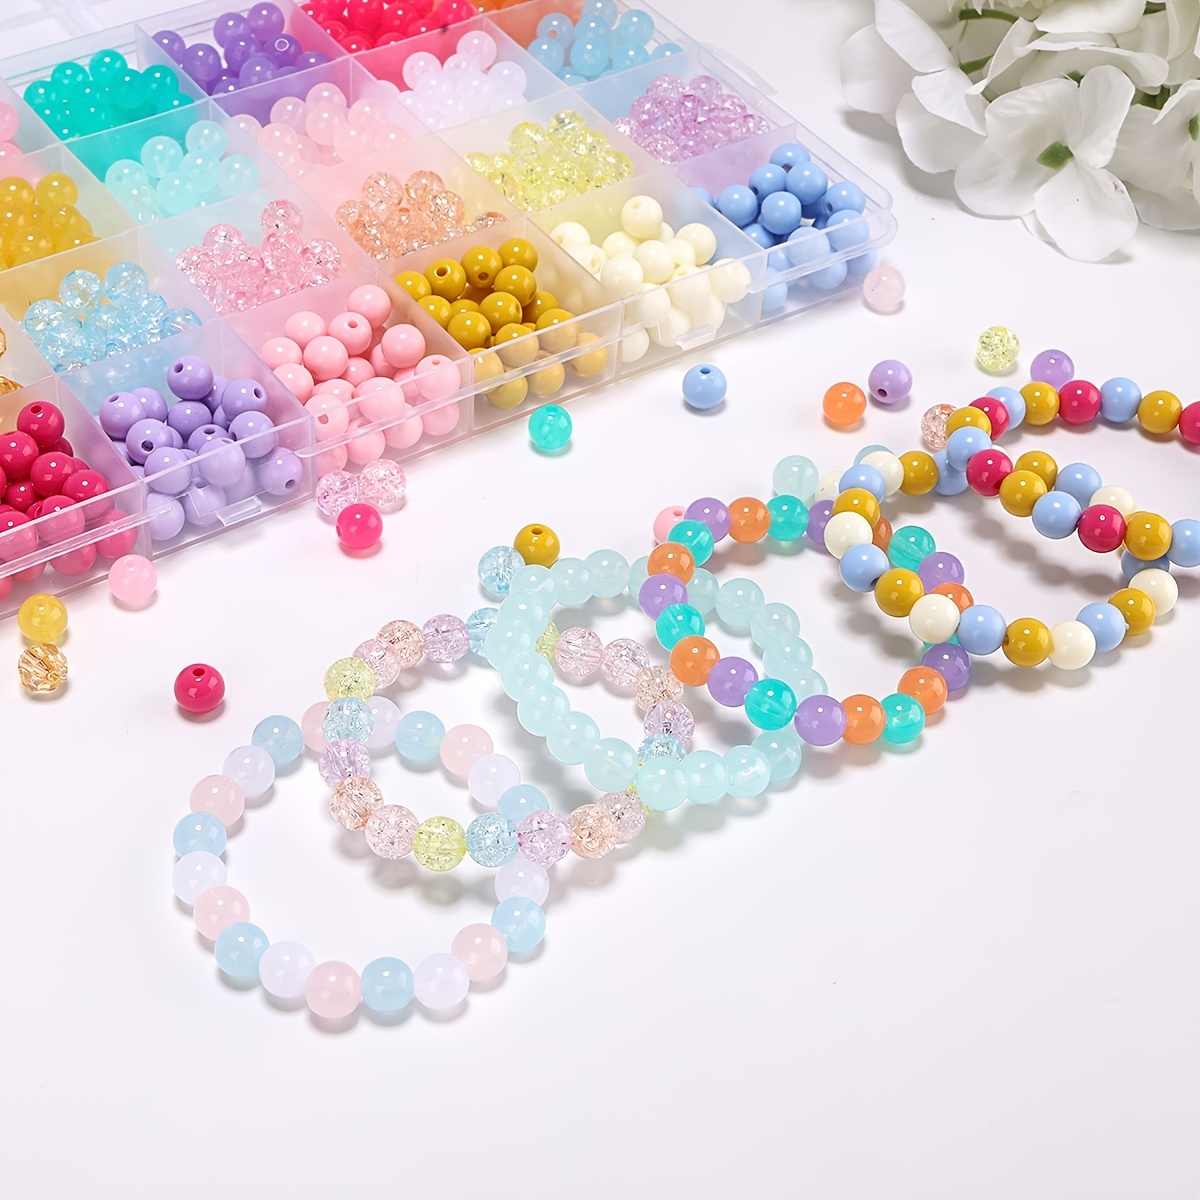 CraftyBook 7500pc Beads Bracelet Making Kits with Small Glass and